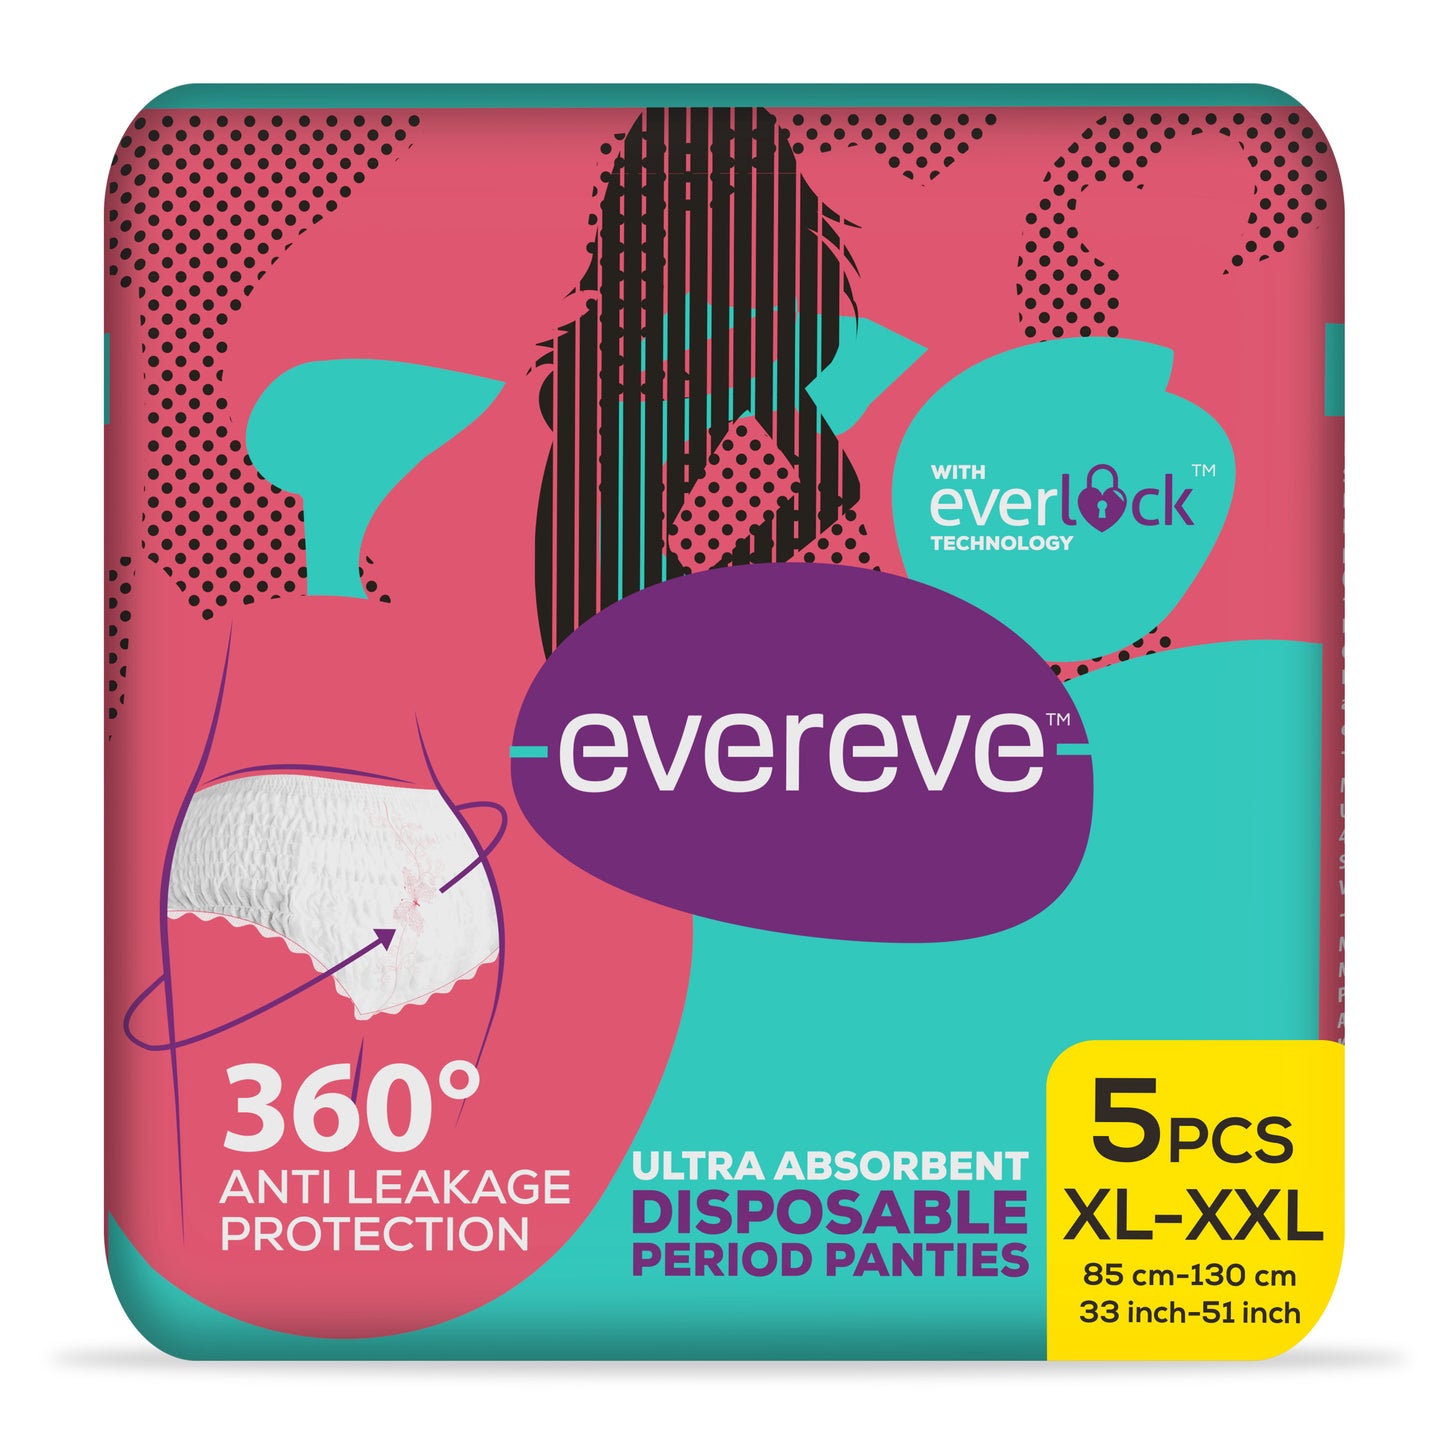 Evereve Ultra Absorbent Disposable Period Panties, XL-XXL, 5's Pack